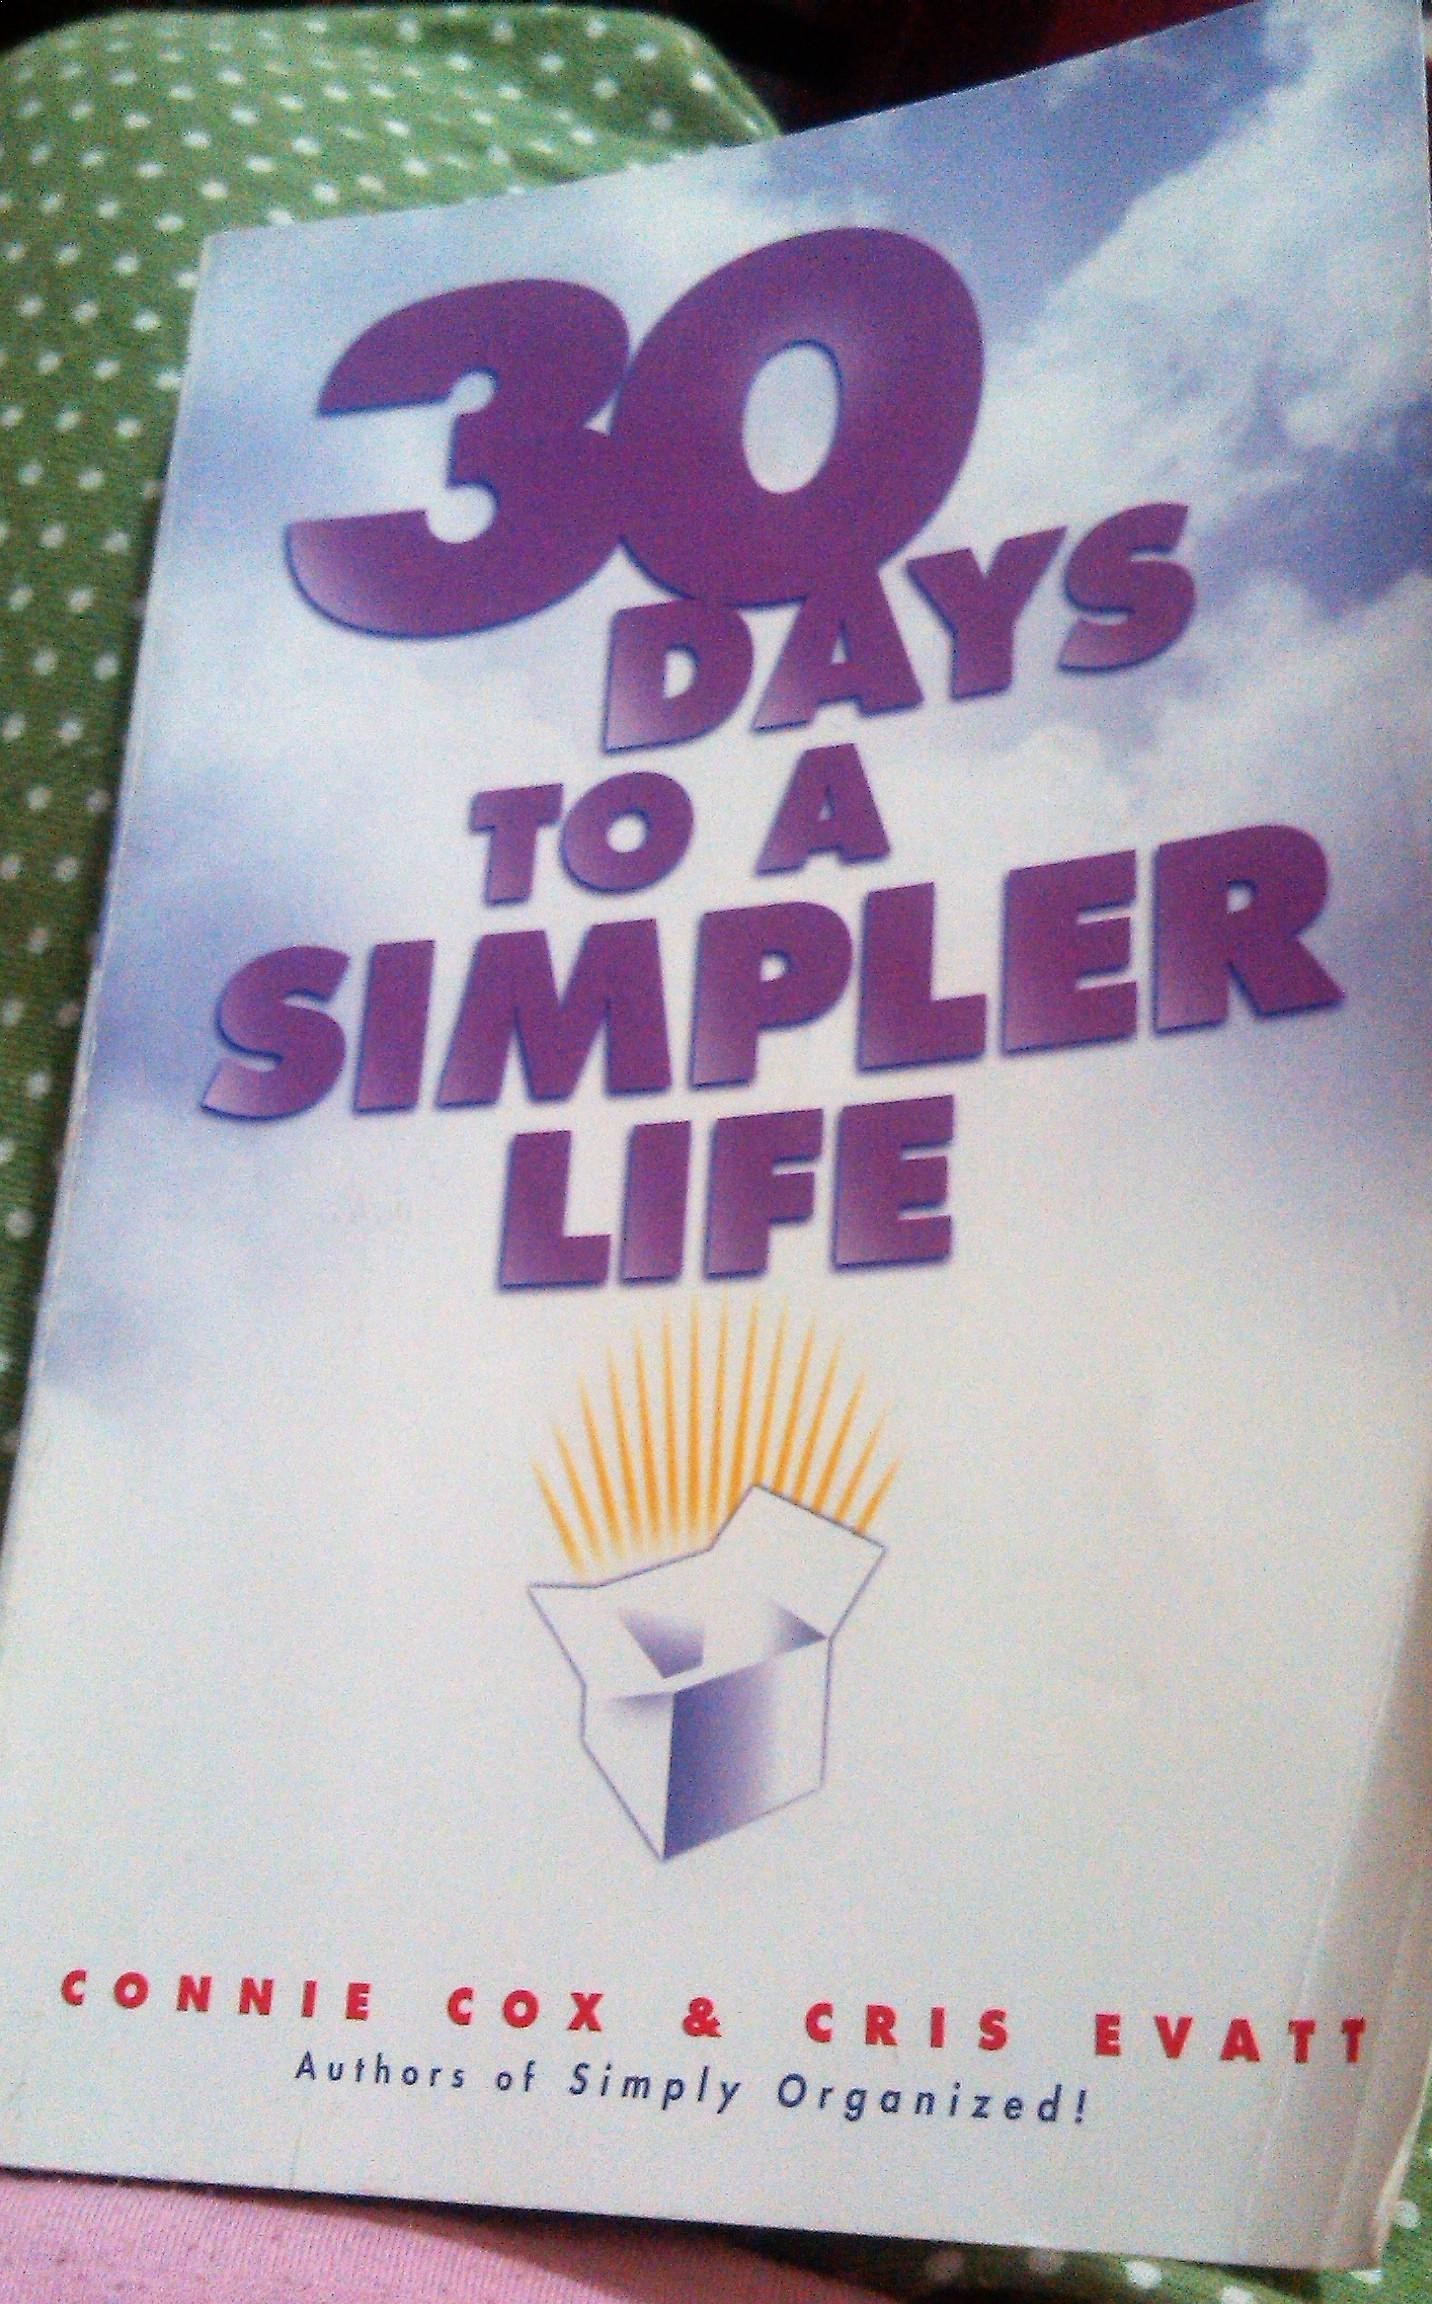 30 days to a simpler life